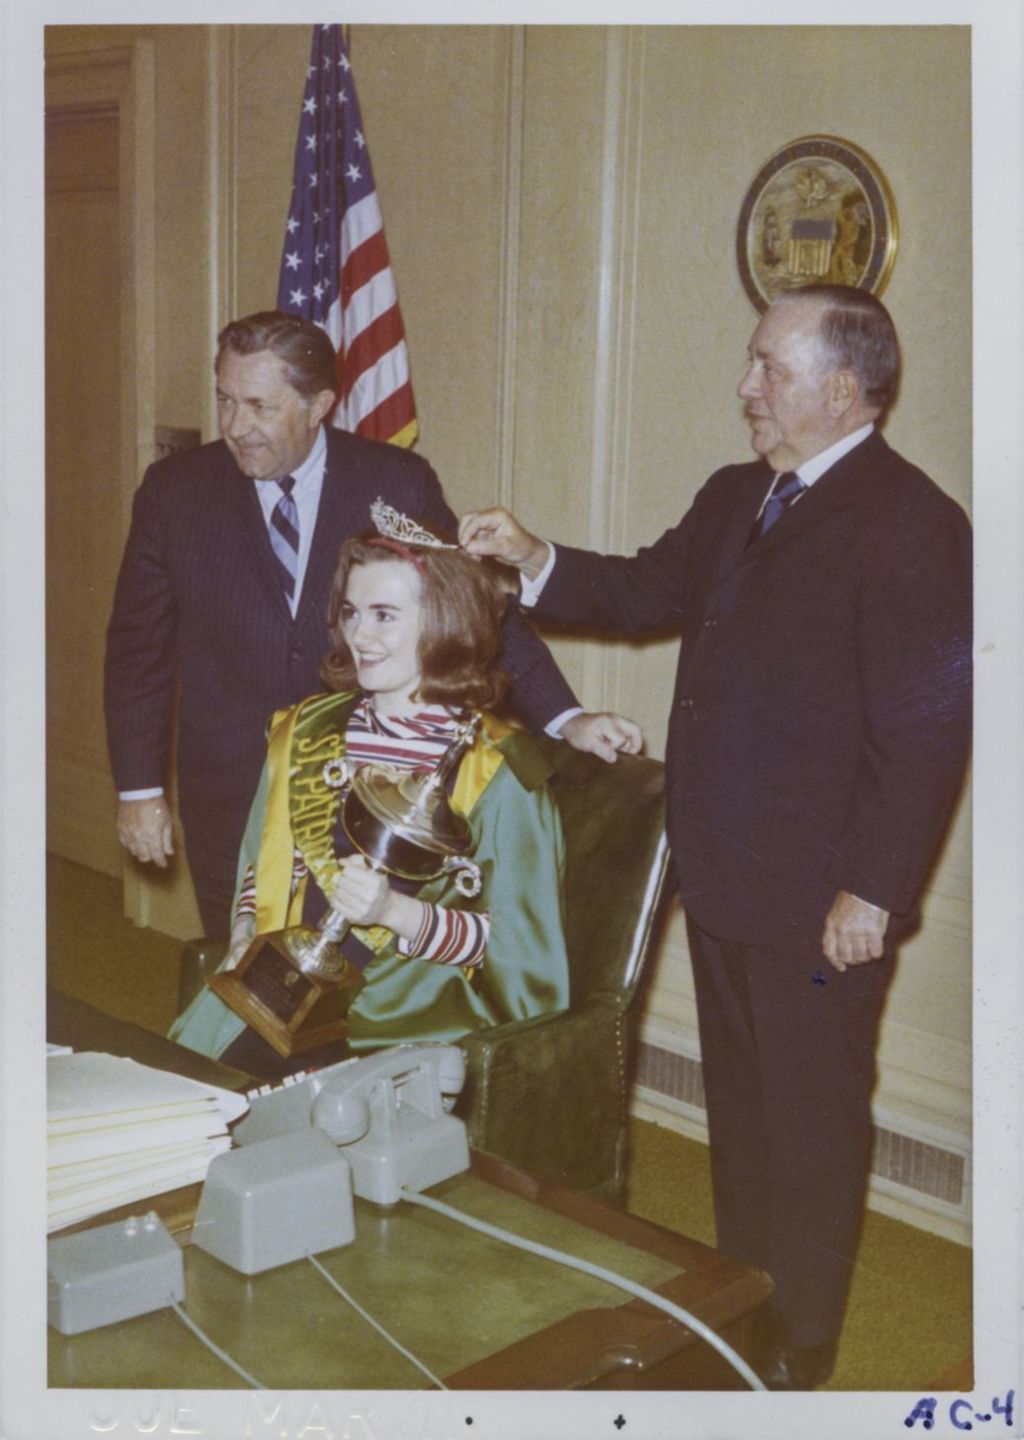 Miniature of Richard J. Daley with a St. Patrick's Day Queen in his office chair